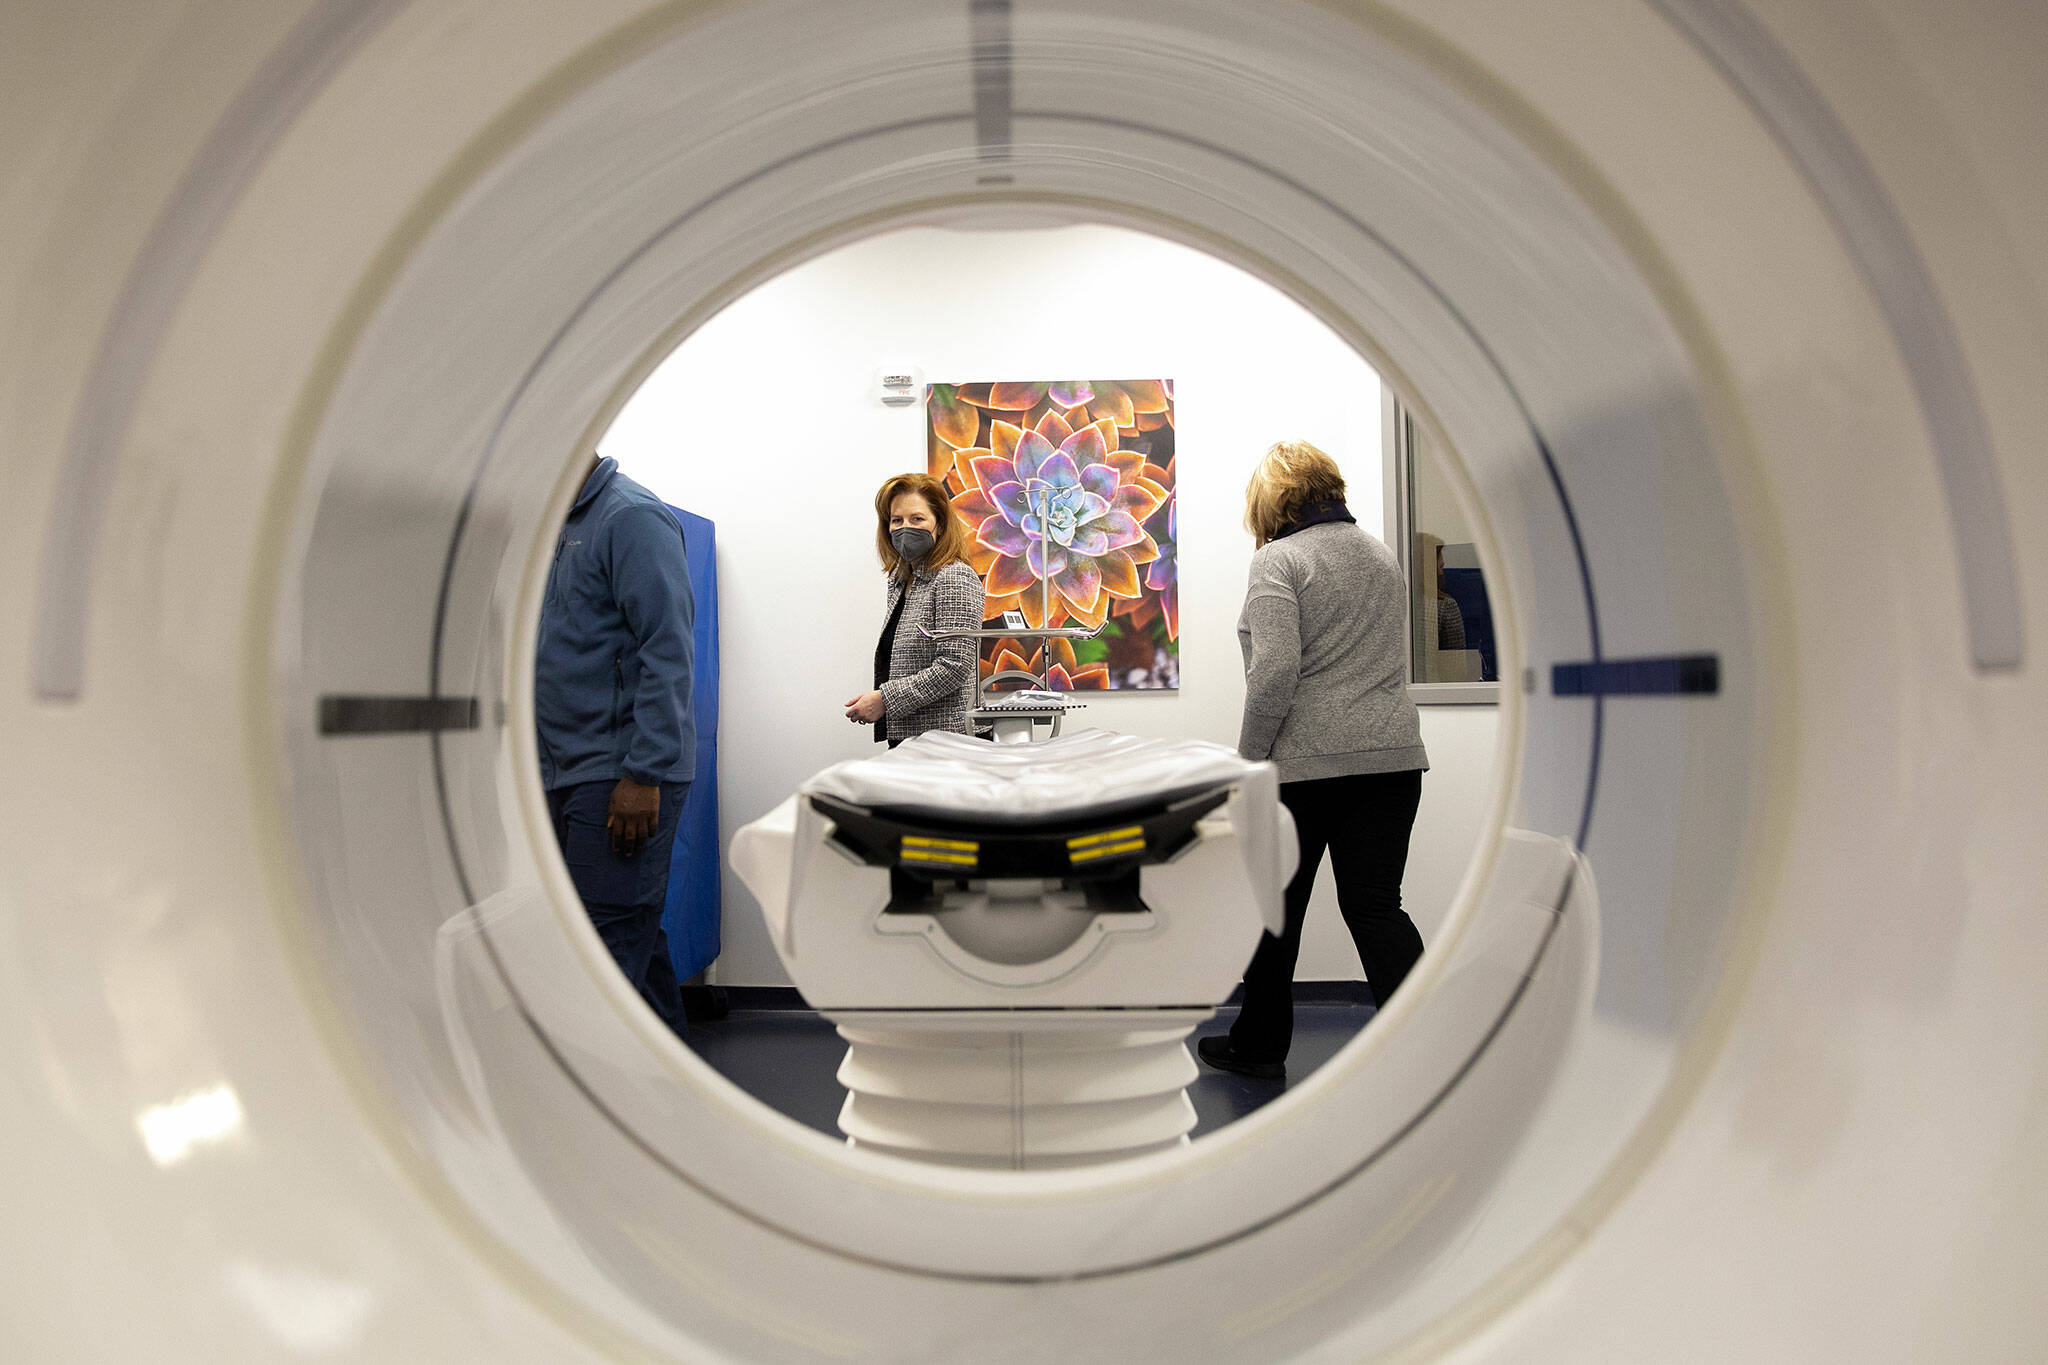 Rep. Kim Schrier walks through a CT scan room with Regional Manager Susan Rushing during a visit to the new VA Puget Sound Health Care System Everett Clinic on Friday, Jan. 20, 2023, in Everett, Washington. The scanner is the first CT at any VA outpatient clinic in the region. (Ryan Berry / The Herald)